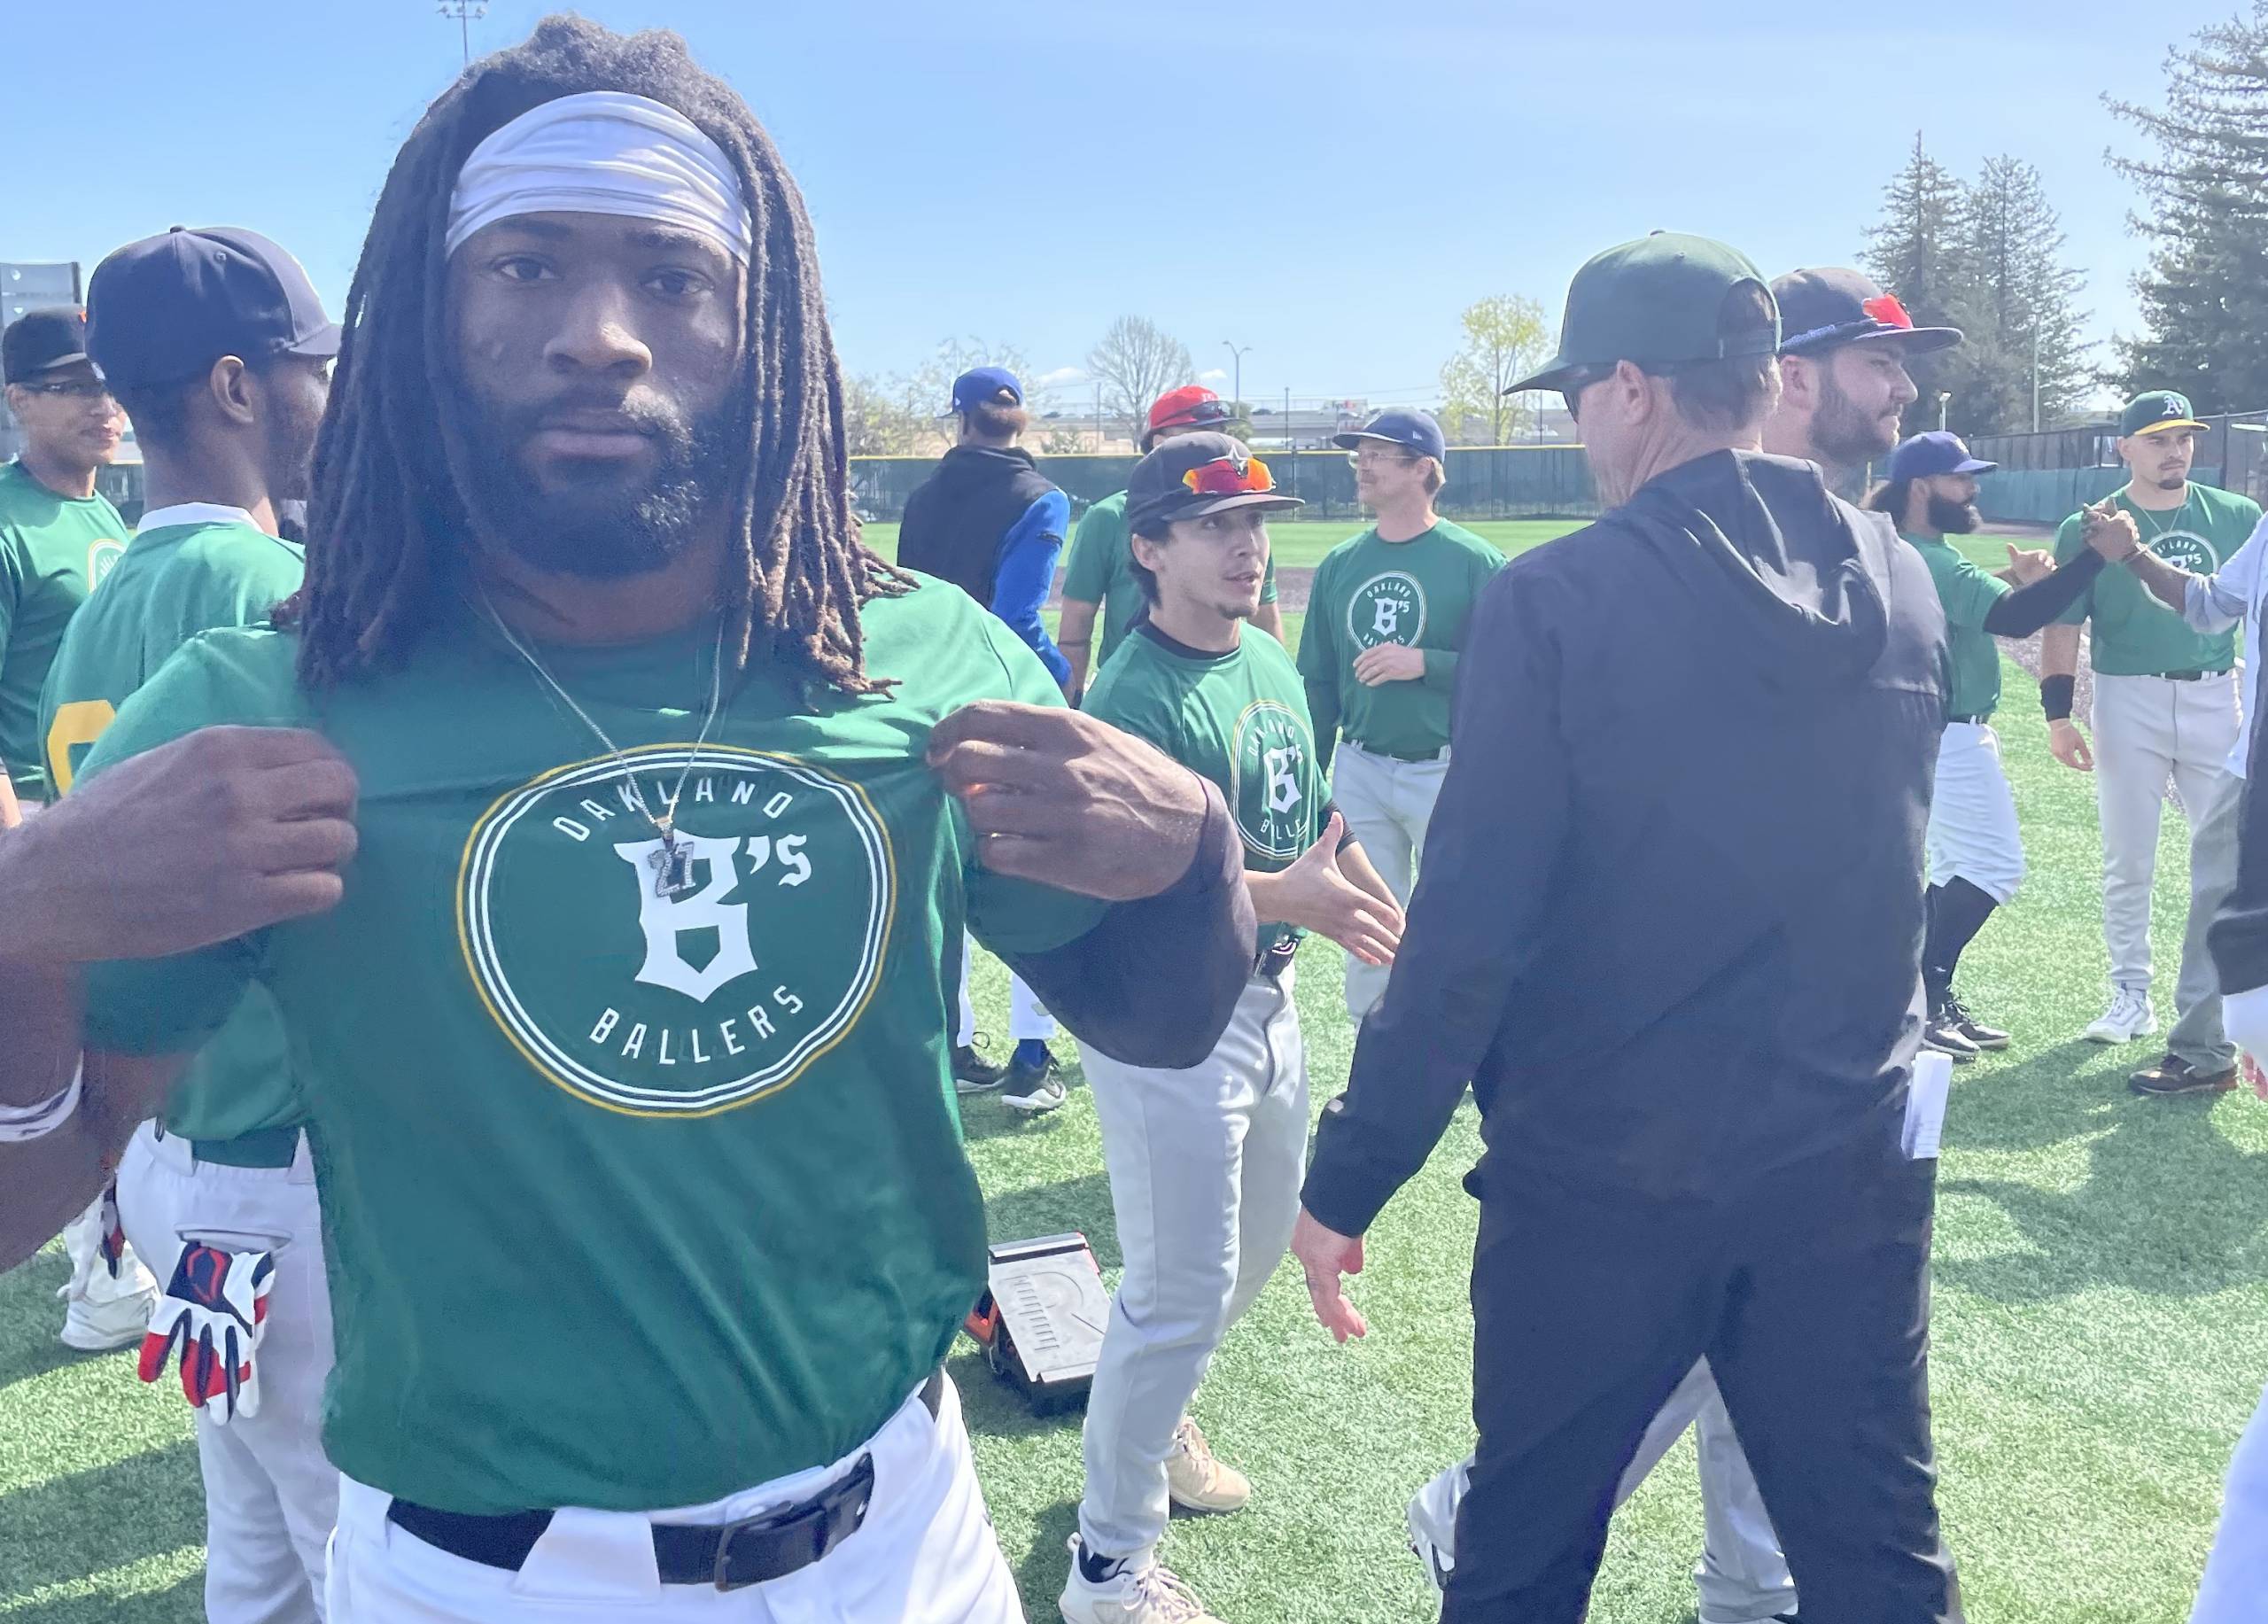 a baseball player shows off his Oakland Ballers jersey at a local tryout